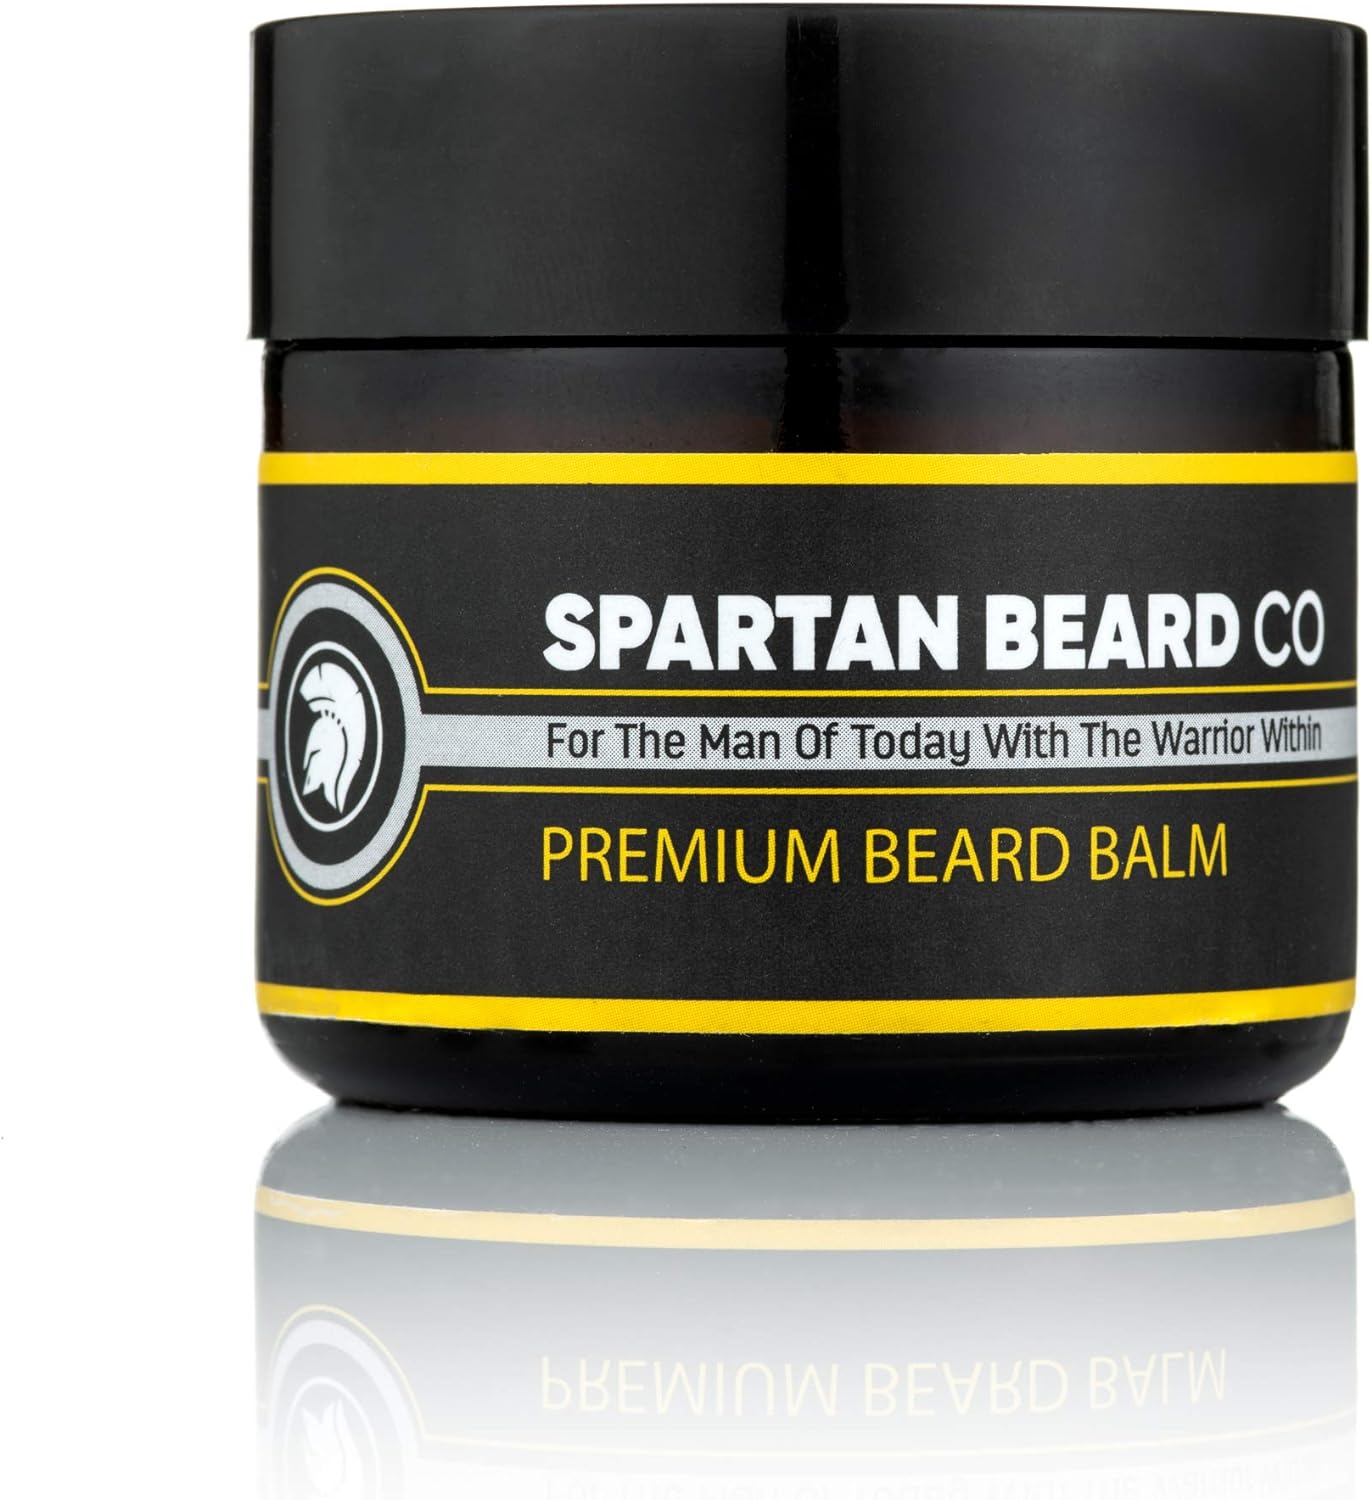 Spartan Beard Co Beard Balm | 7 Premium Oils & Butters Crafted For Beard Face And Skin Health | Reduce Frizz | Leave In Conditioner | Beard Styling Wax | Promotes Beard Growth, Health And Shine